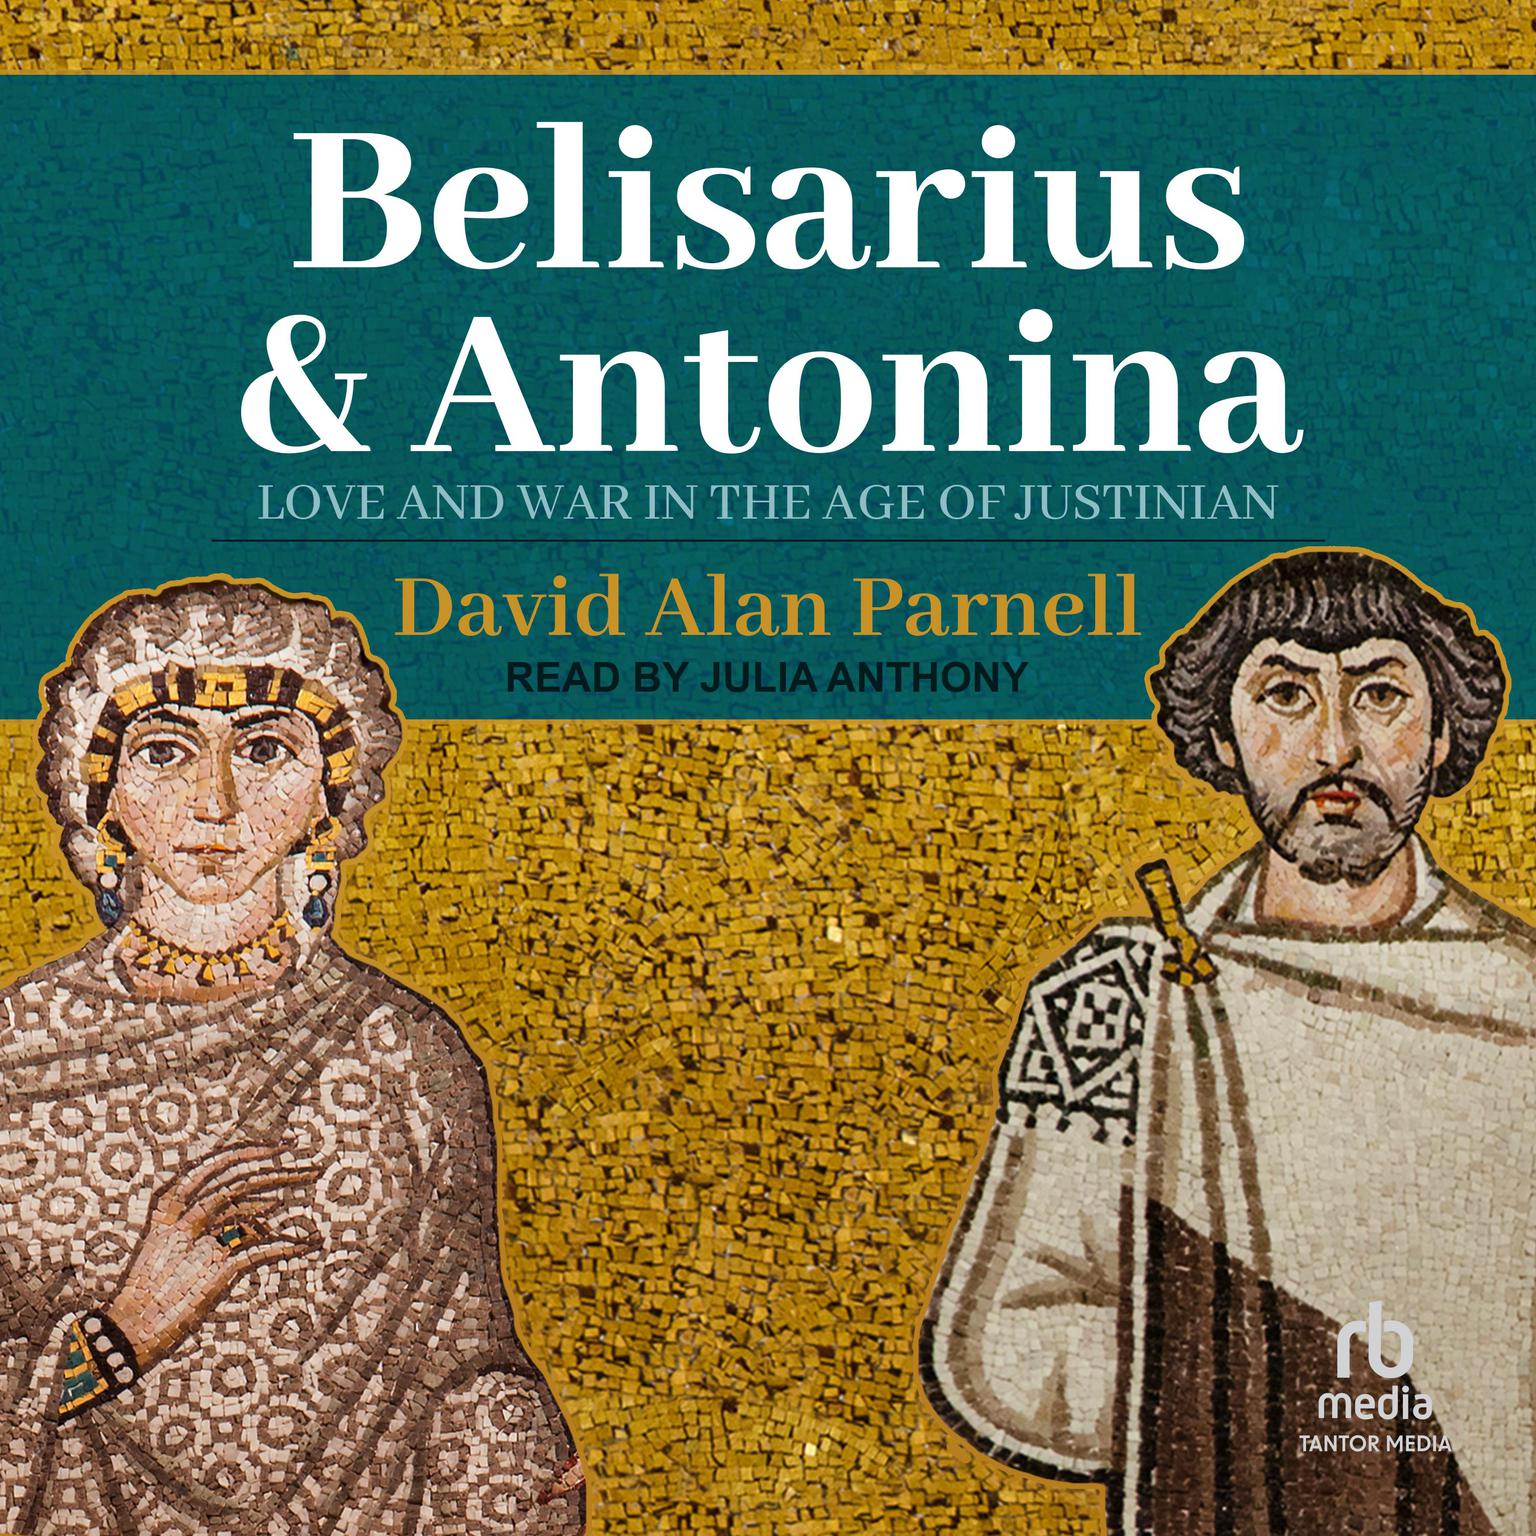 Belisarius & Antonina: Love and War in the Age of Justinian Audiobook, by David Alan Parnell